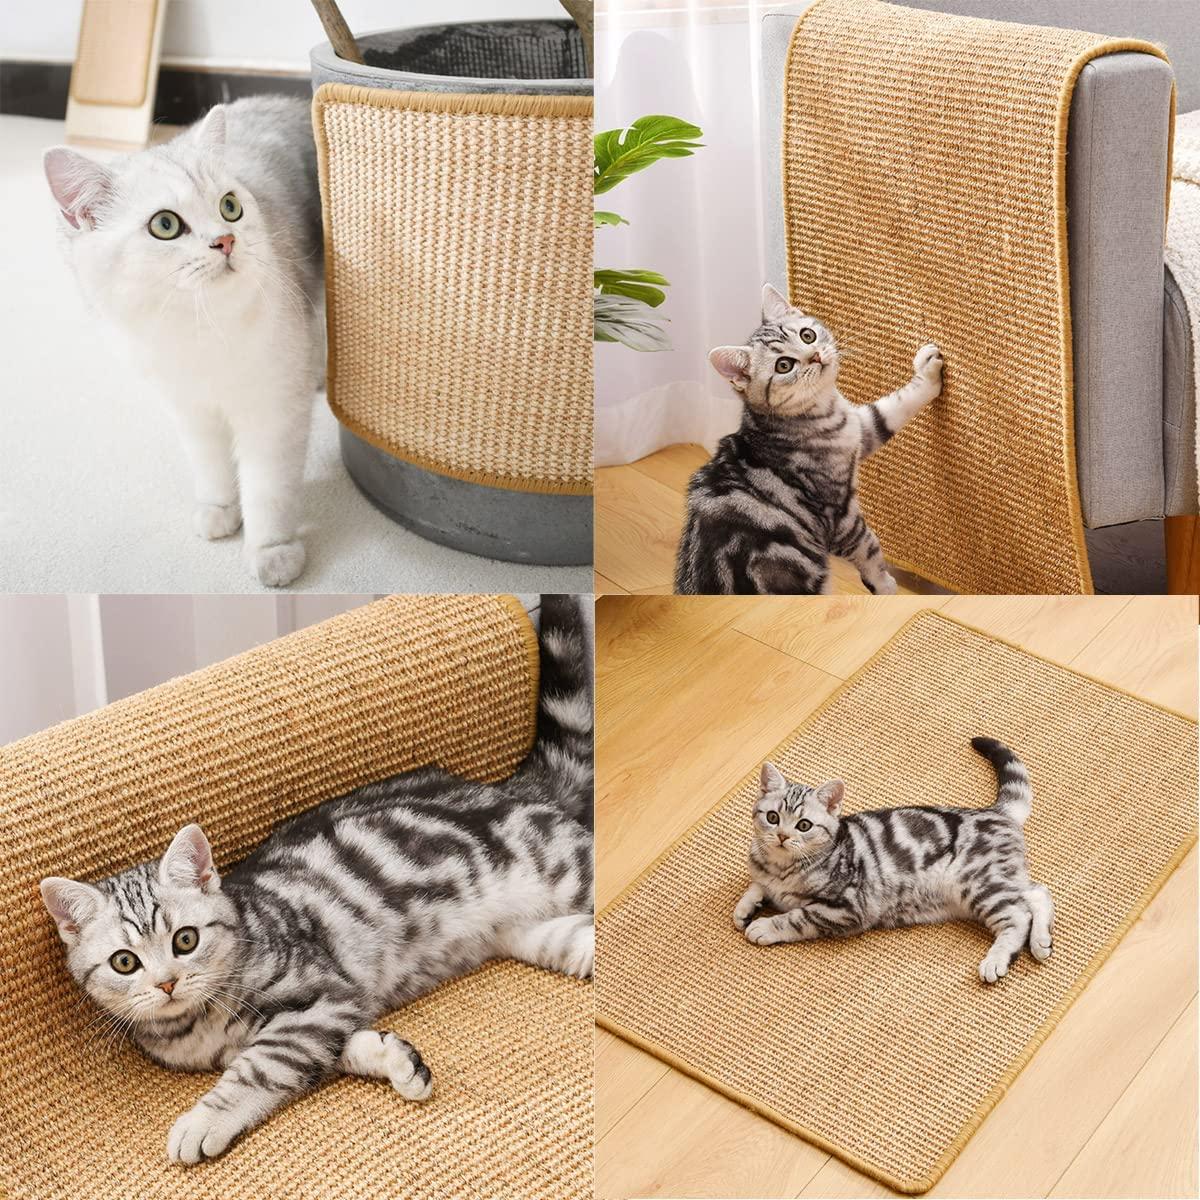 This Tape Stops The Cat From Scratching Up Your Furniture